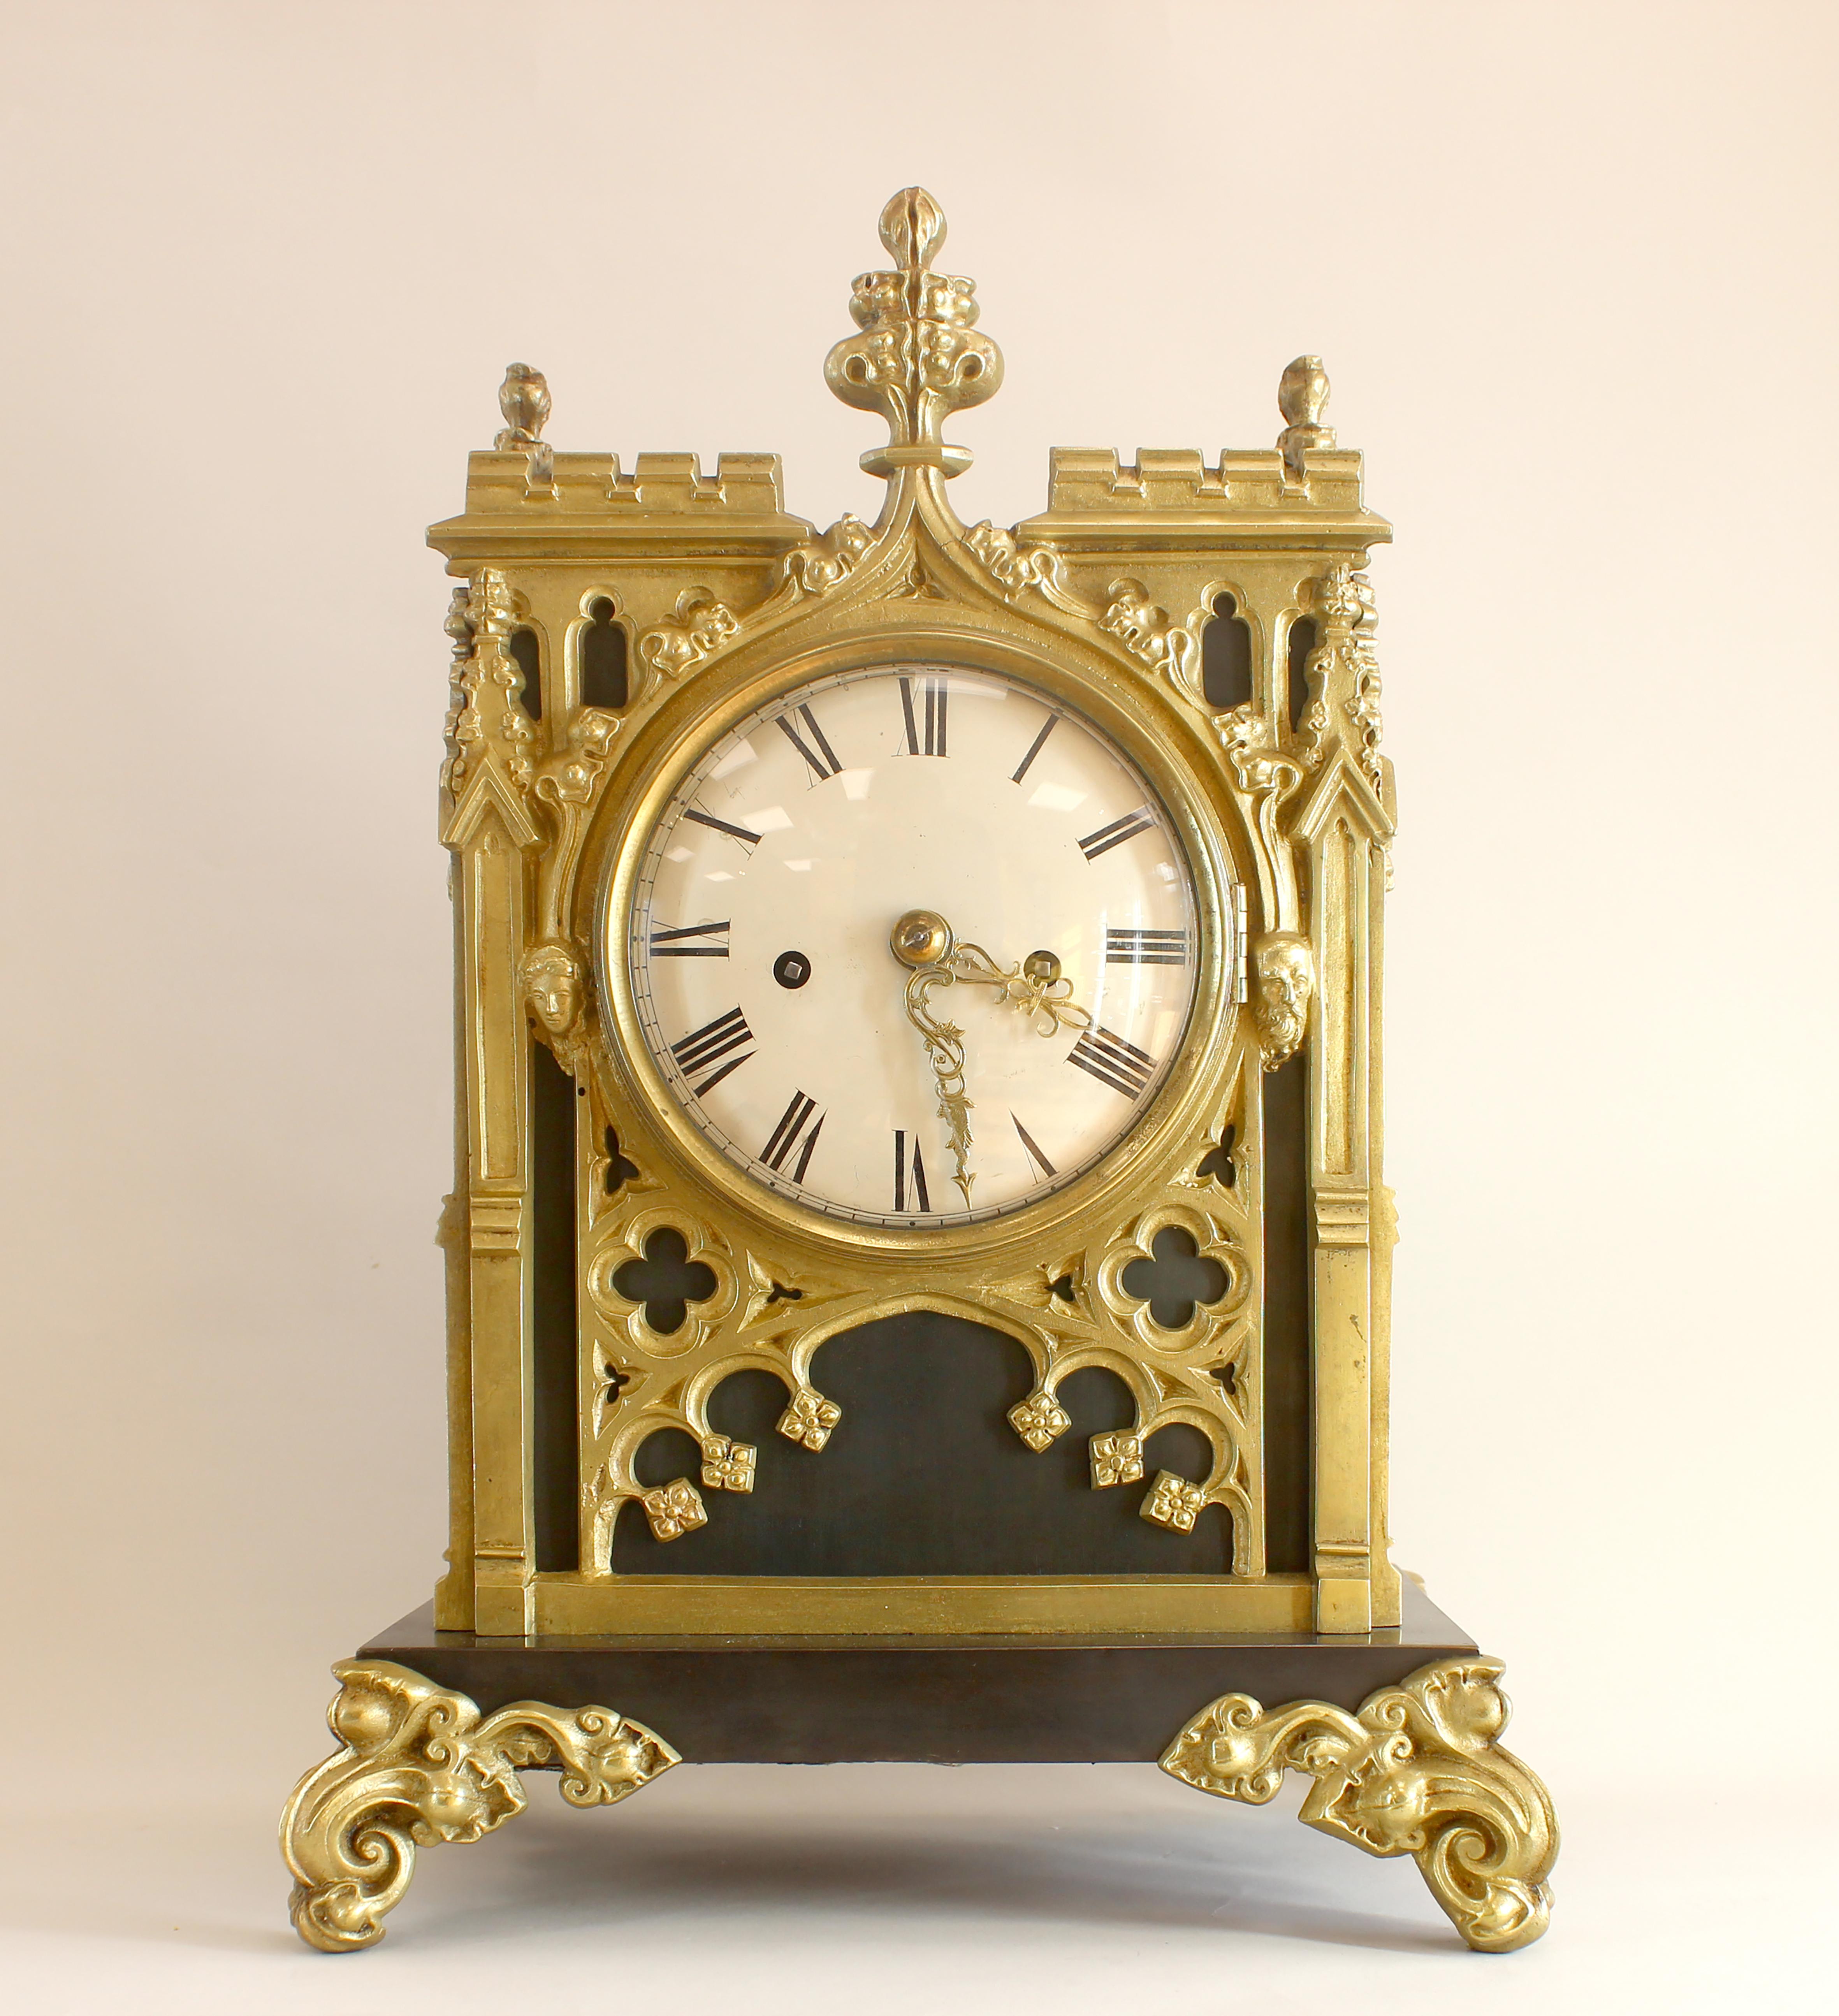 A gothic revival bronze and brass bracket clock with a 5-inch silvered convex Roman dial. The  twin fusee movement strikes on a bell, with a heavy high quality pendulum and hold fast. The case of crocketed lancet-arched design, pierced with